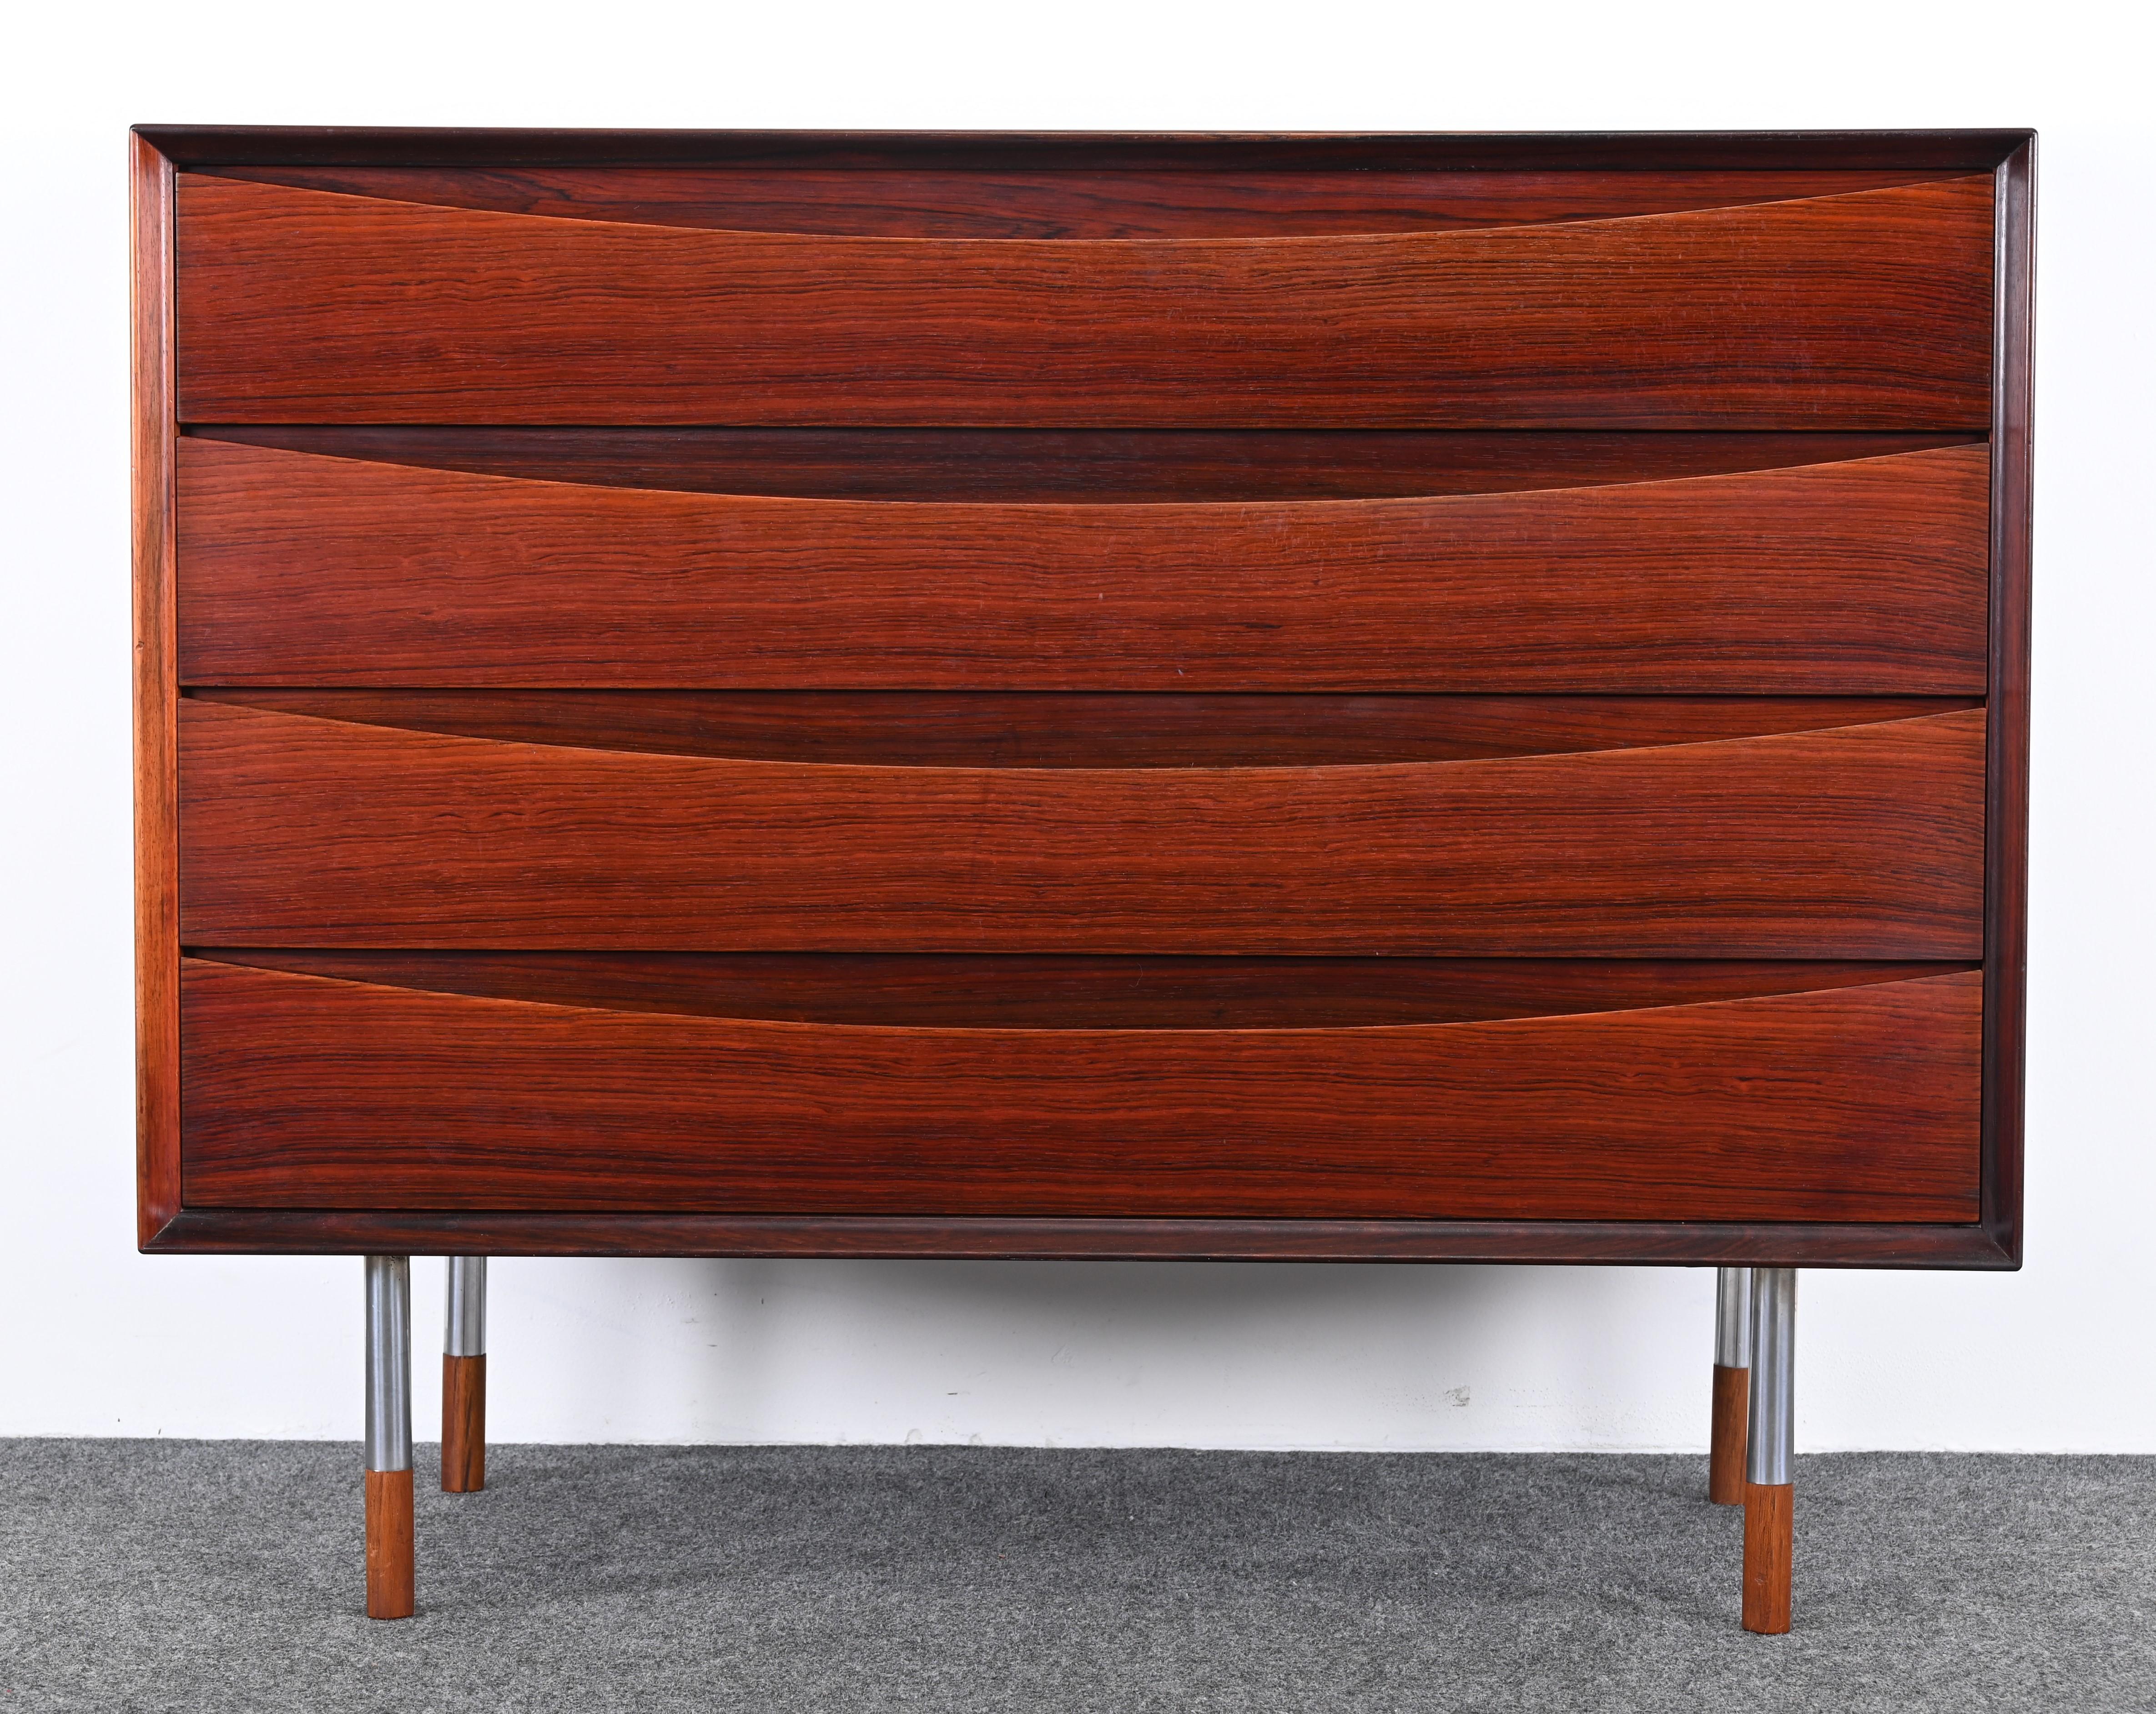 A gorgeous rosewood Chest of Drawers by Arne Vodder for Sibast, 1950s. This Scandinavian Modern cabinet seems to be rare as it has metal legs instead of wood and there are not many on the marketplace. The Danish rosewood chest would look great in